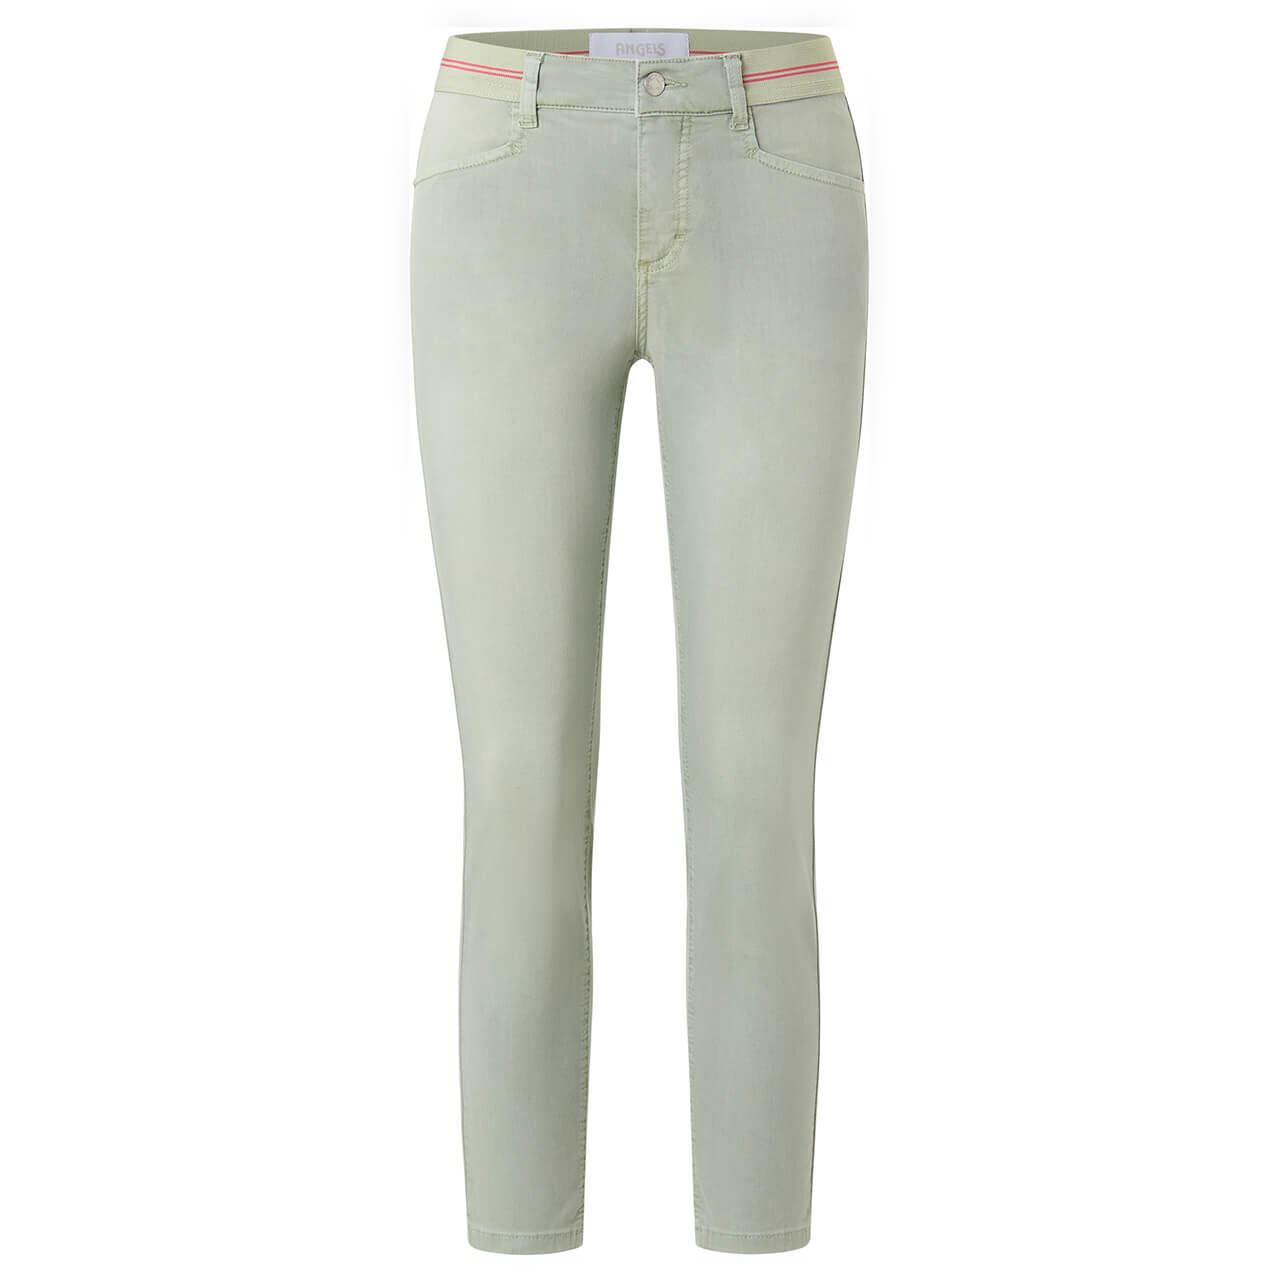 Angels Ornella Sporty 7/8 Jeans jade green used